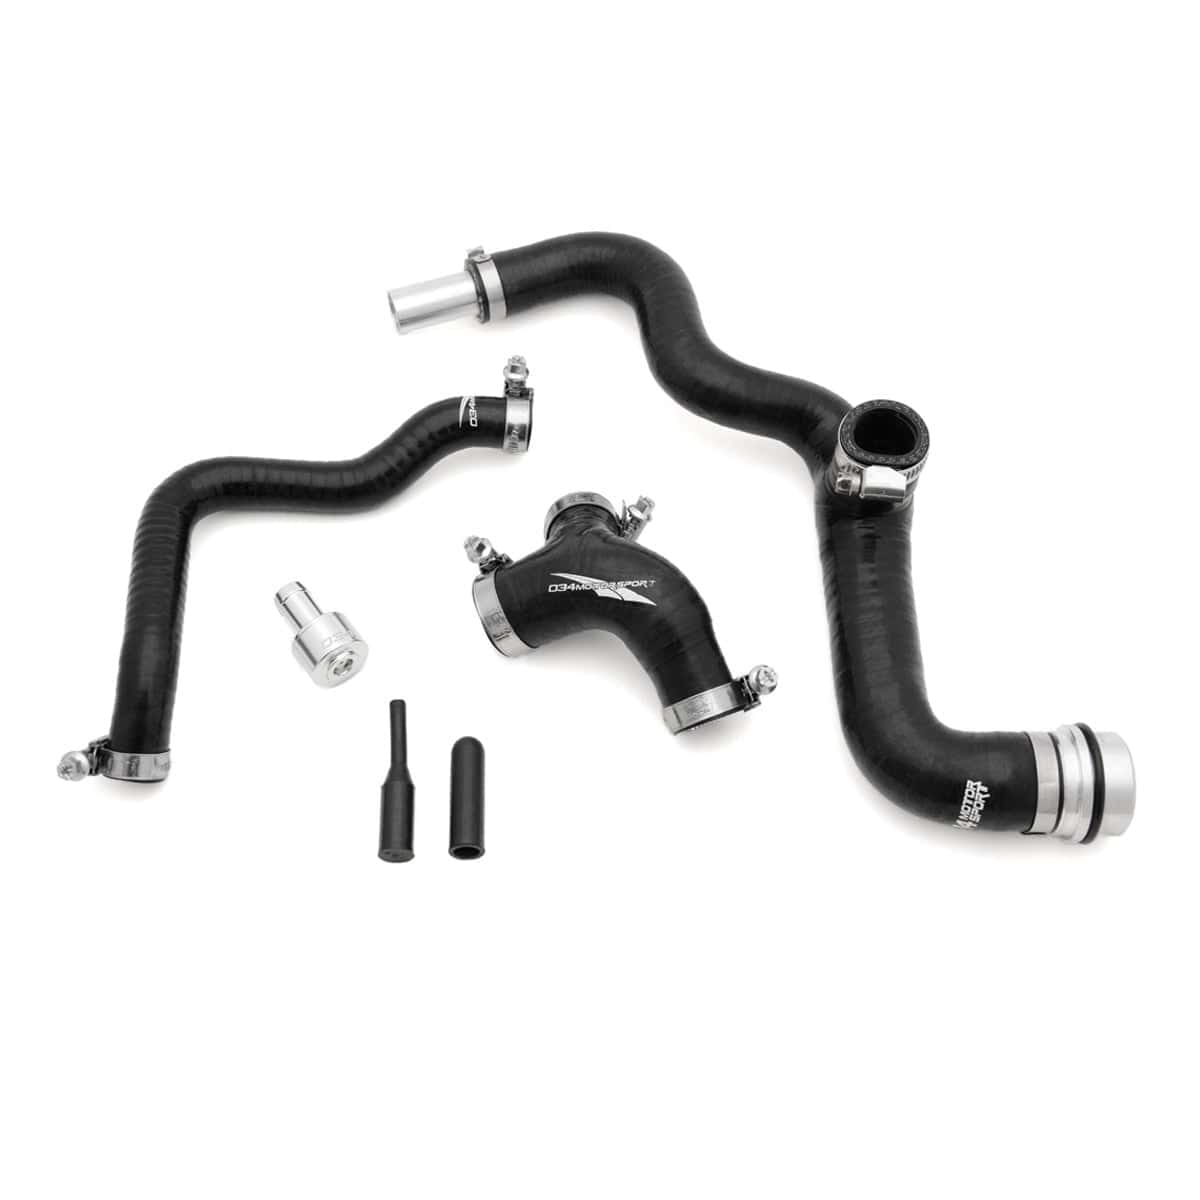 034Motorsport Breather Hose Kit, Mid-AMB Audi A4 & Late-AWM Volkswagen Passat 1.8T, Reinforced Silicone - ML Performance